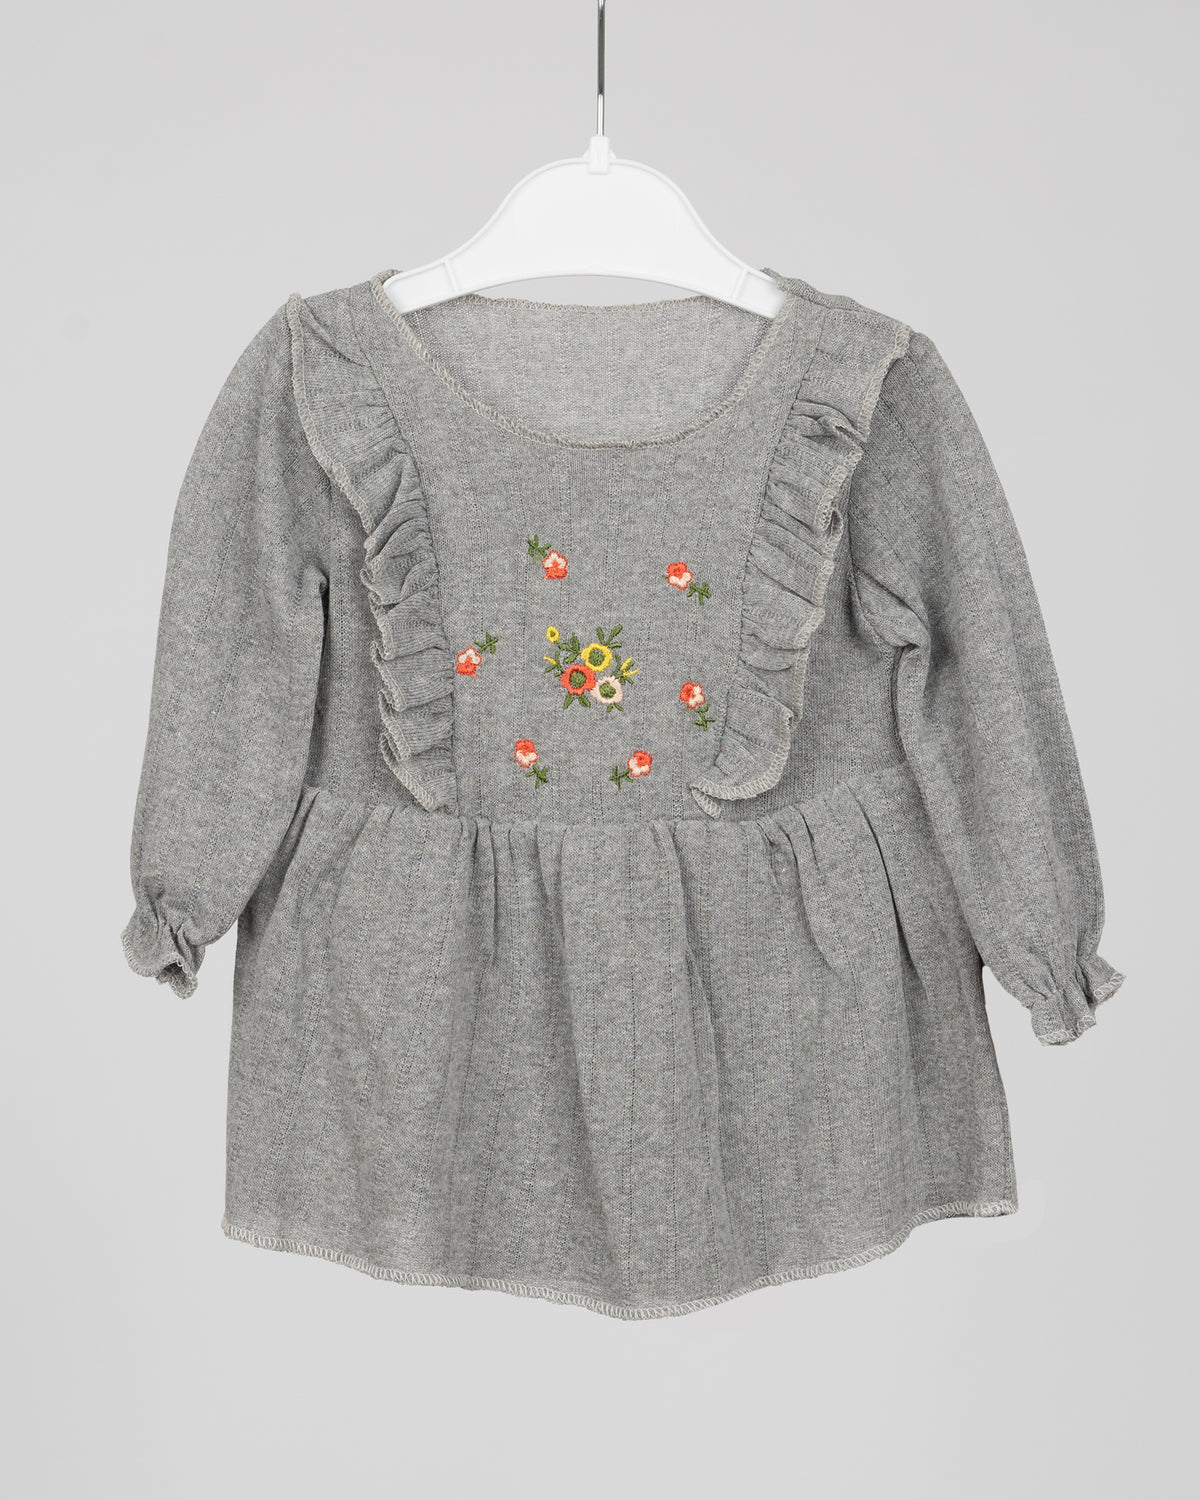 Girl embroidered Top dress